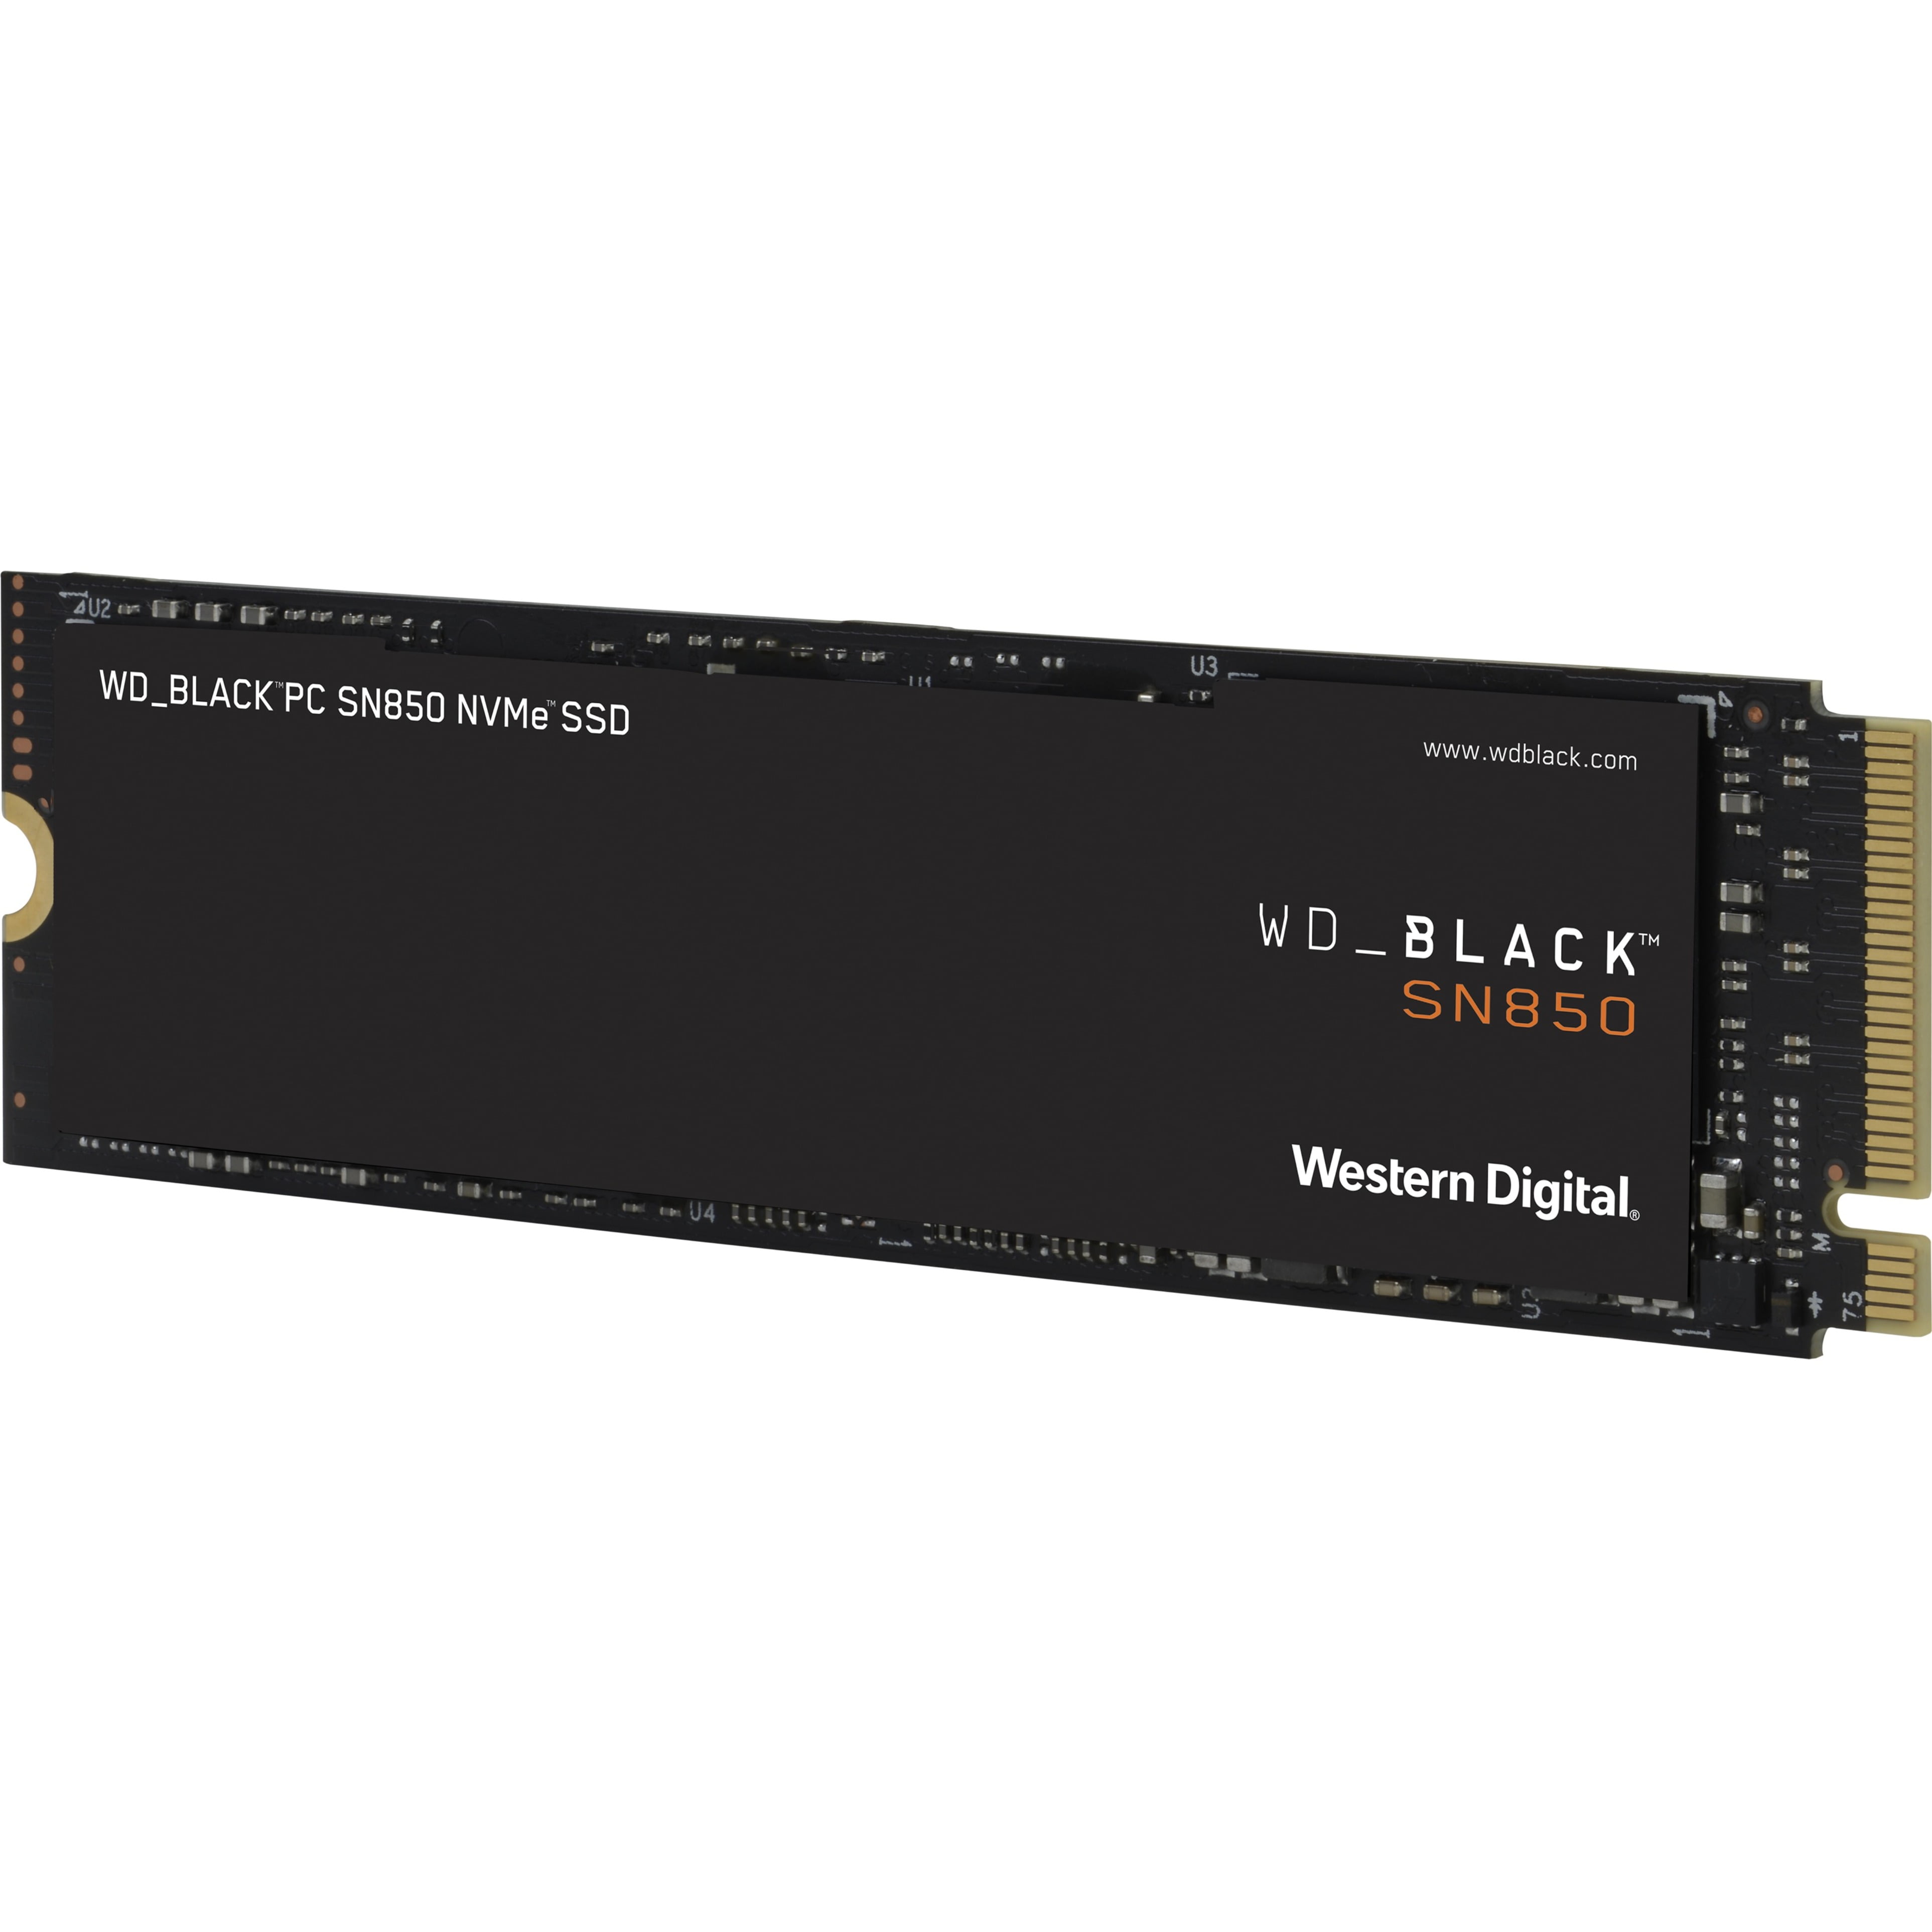  WD_BLACK 1TB SN850P NVMe M.2 SSD Officially Licensed